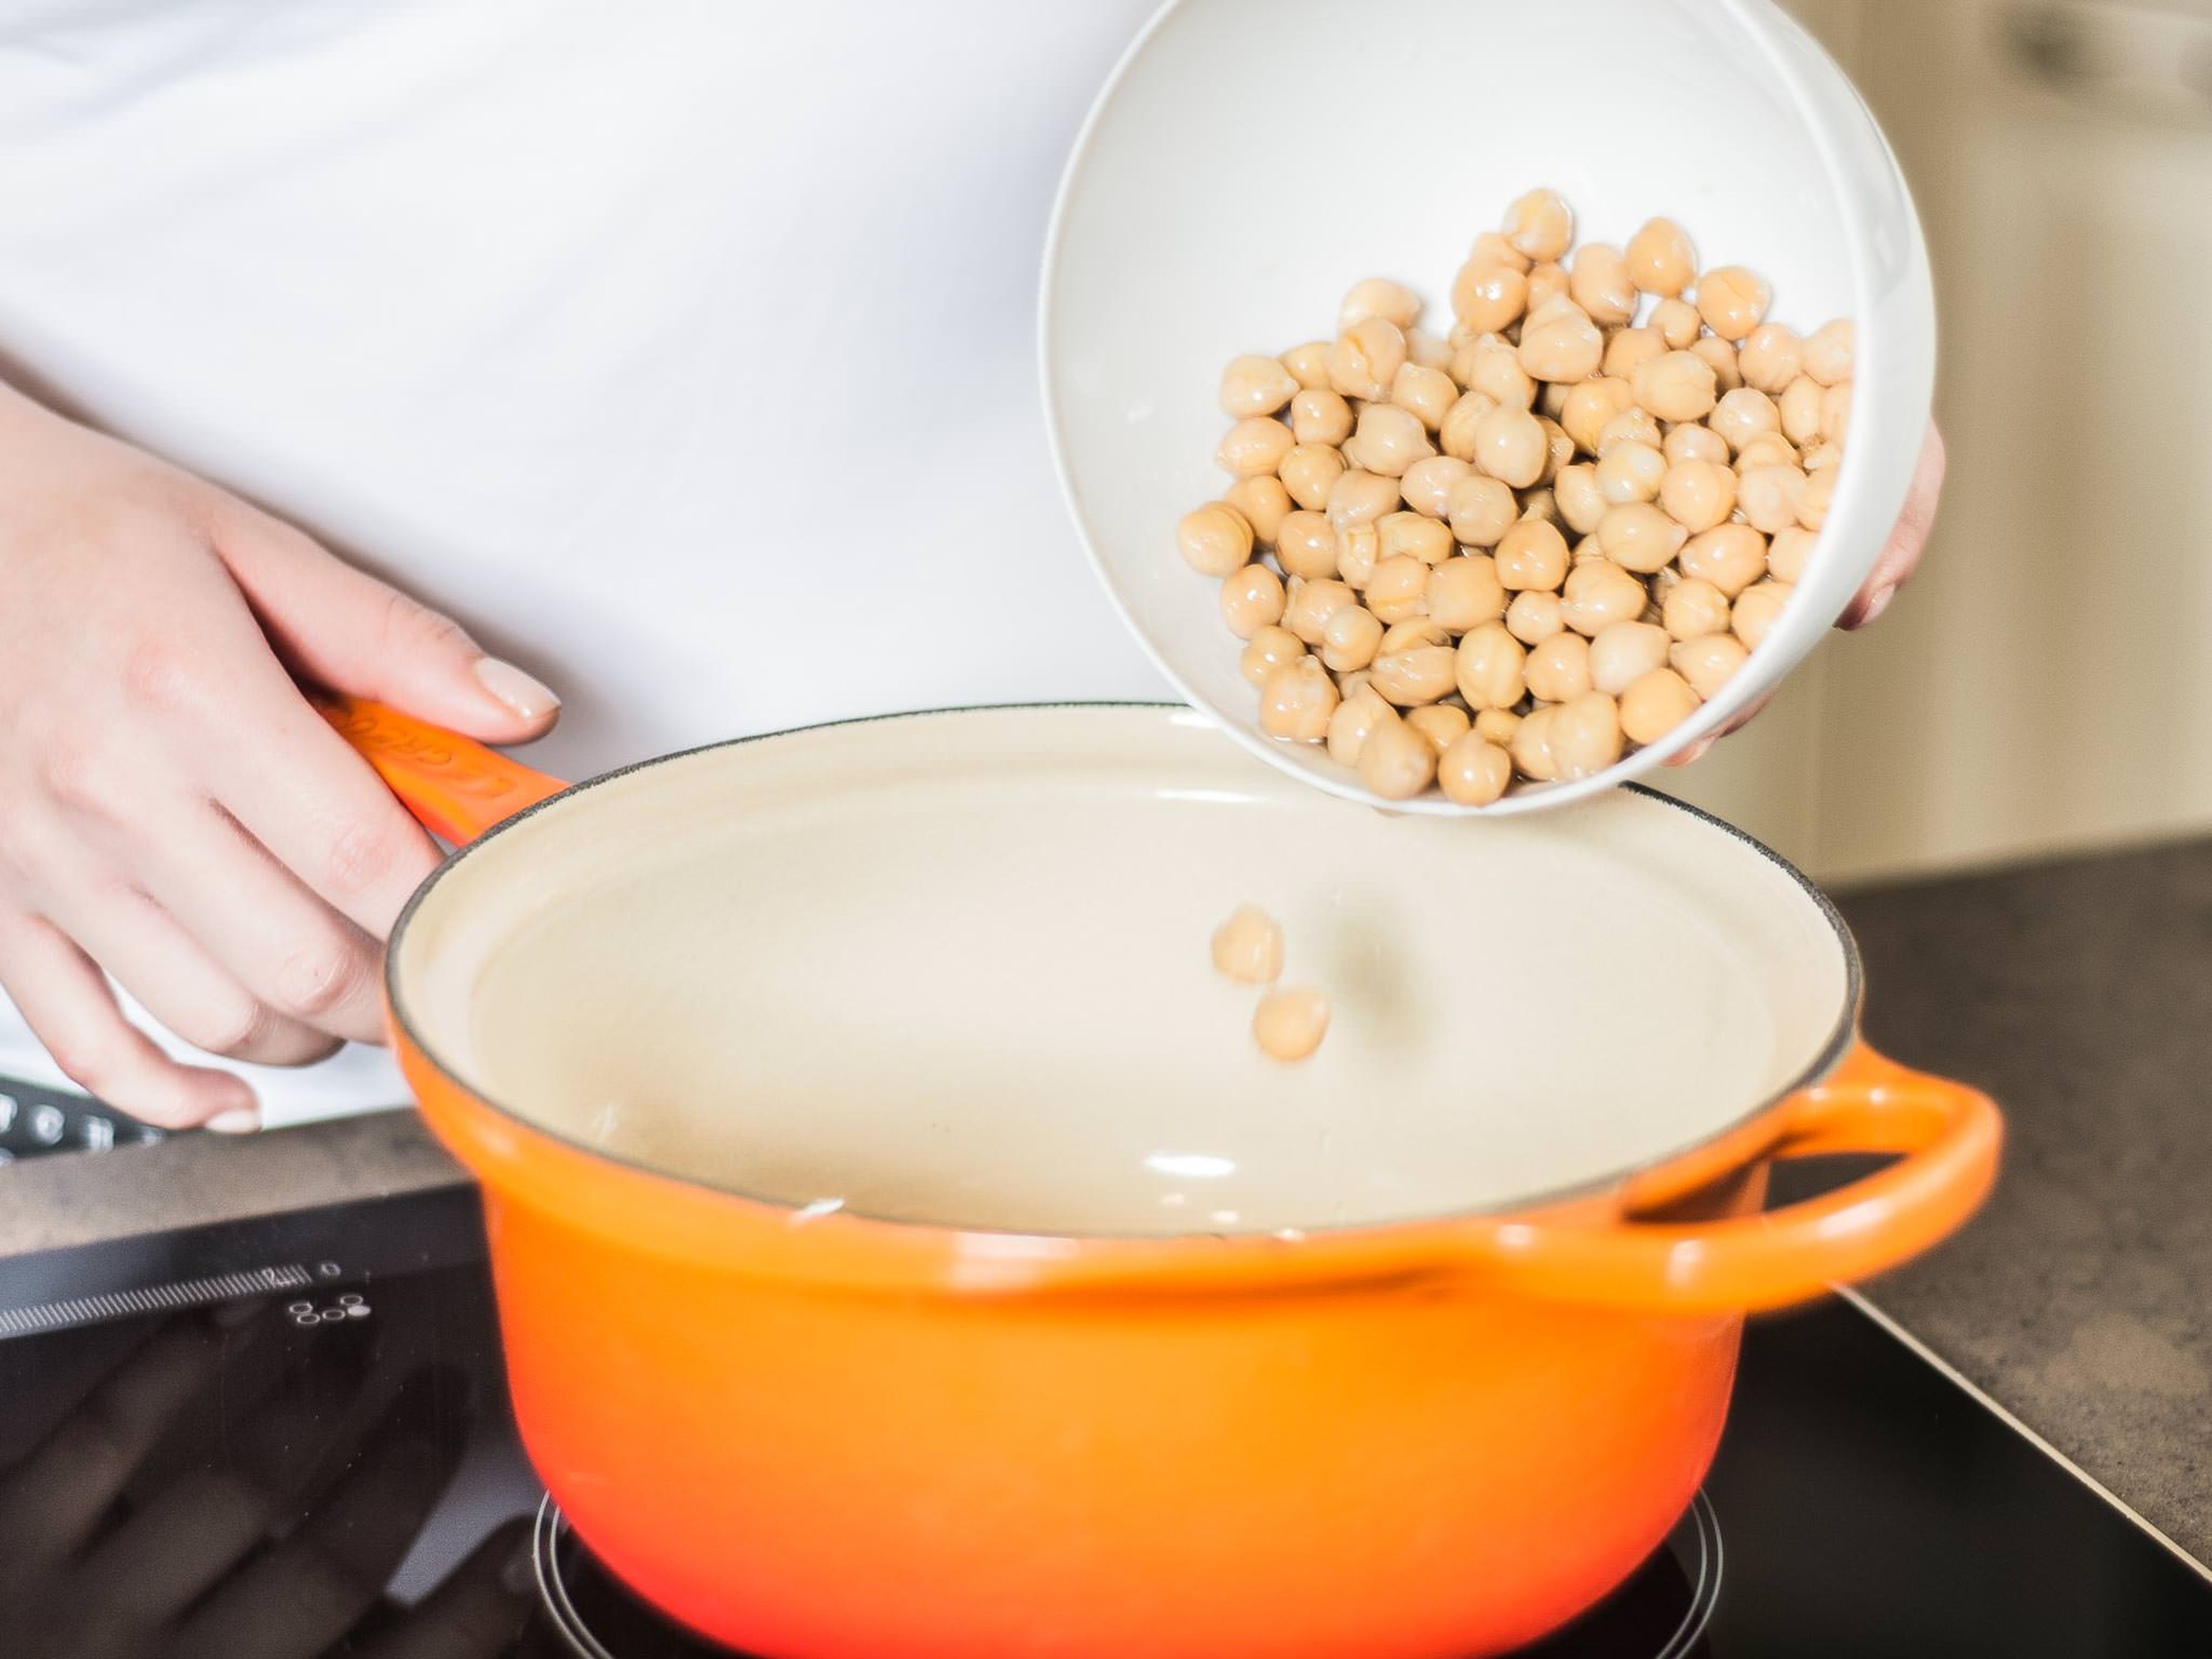 Heat chickpeas in a small saucepan. Add ginger and garlic and toss together. Remove from heat and set aside to cool.